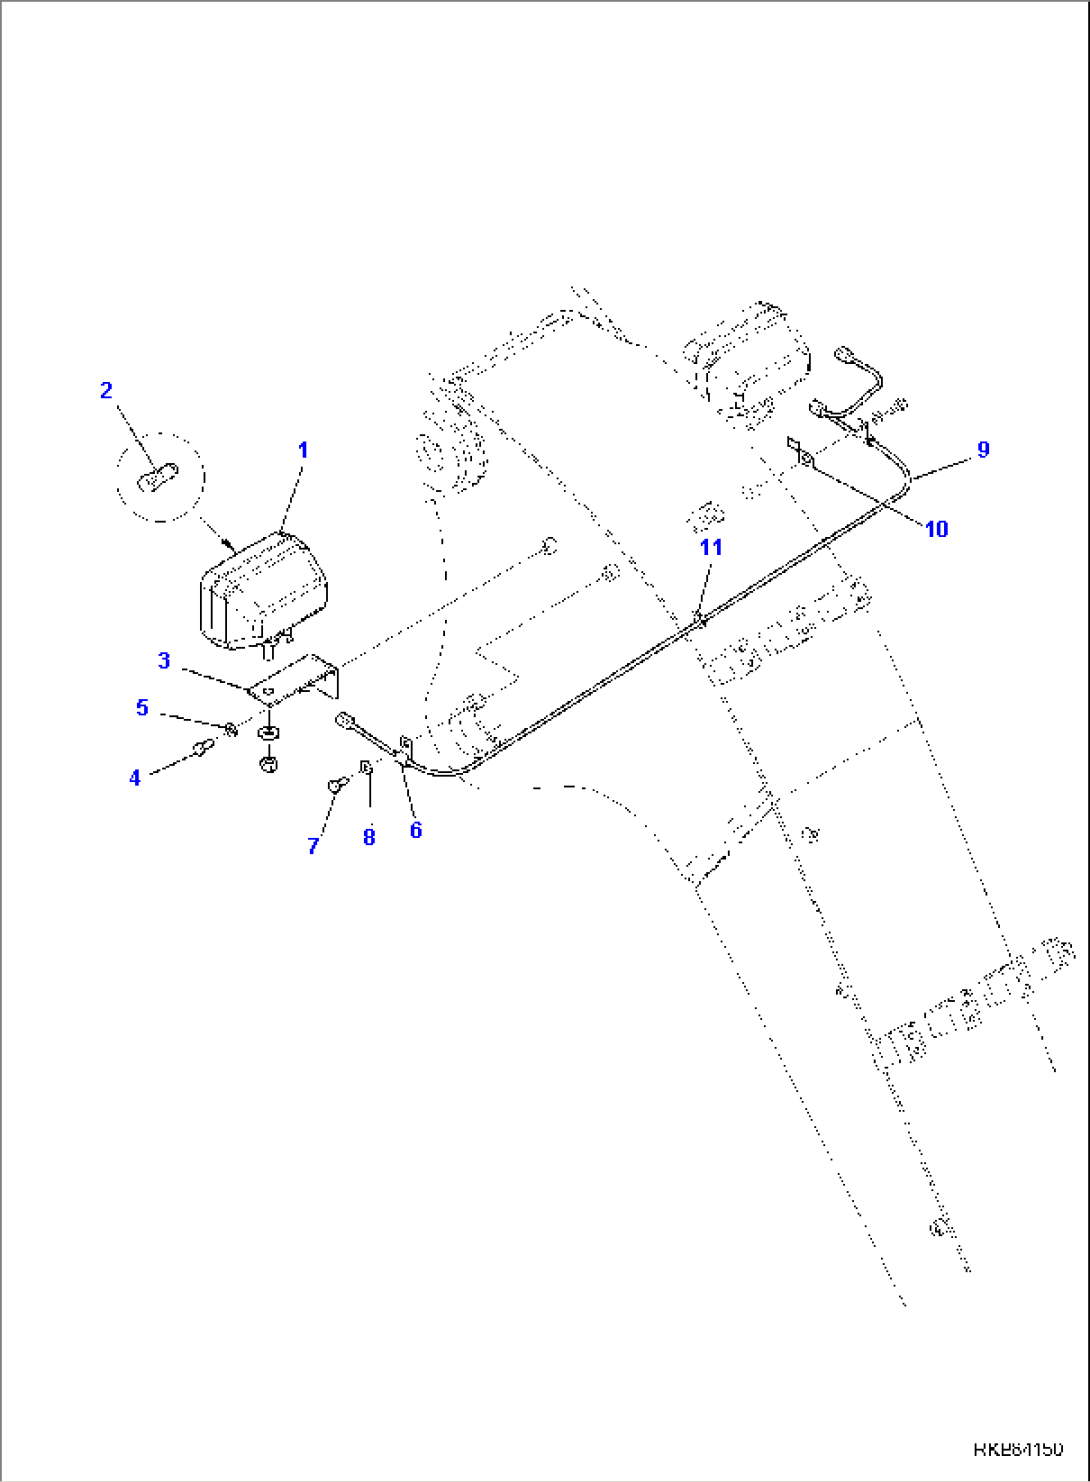 ADDITIONAL WORKING LAMP, FOR MACHINE WITH VARIABLE 2-PIECE BOOM, BOOM